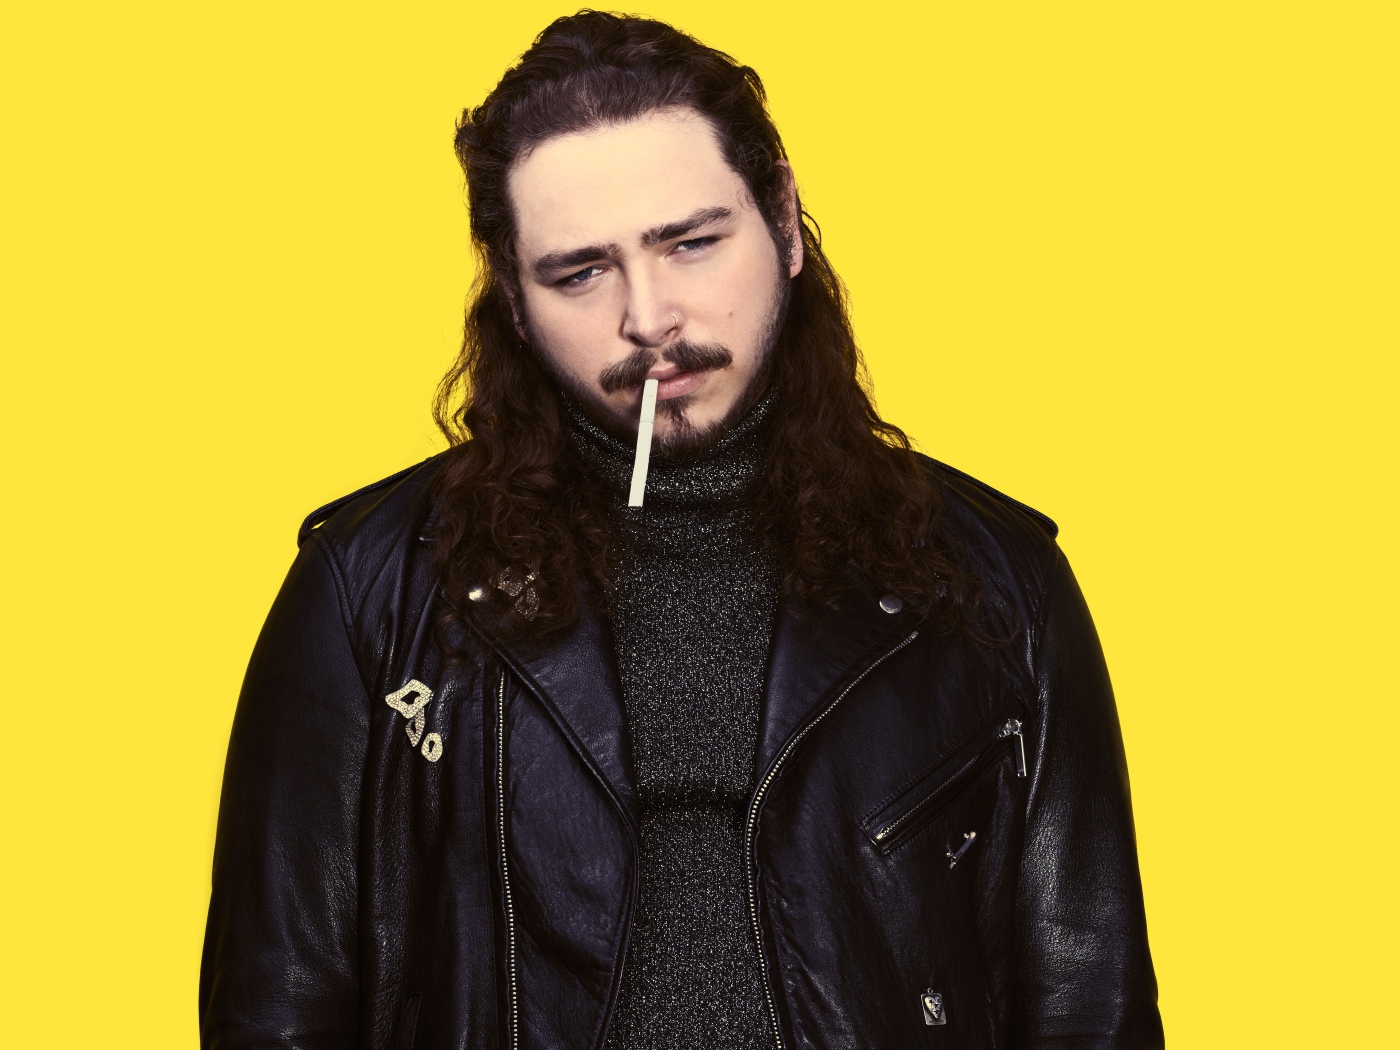 American rapper Post Malone in a black jacket on a yellow background